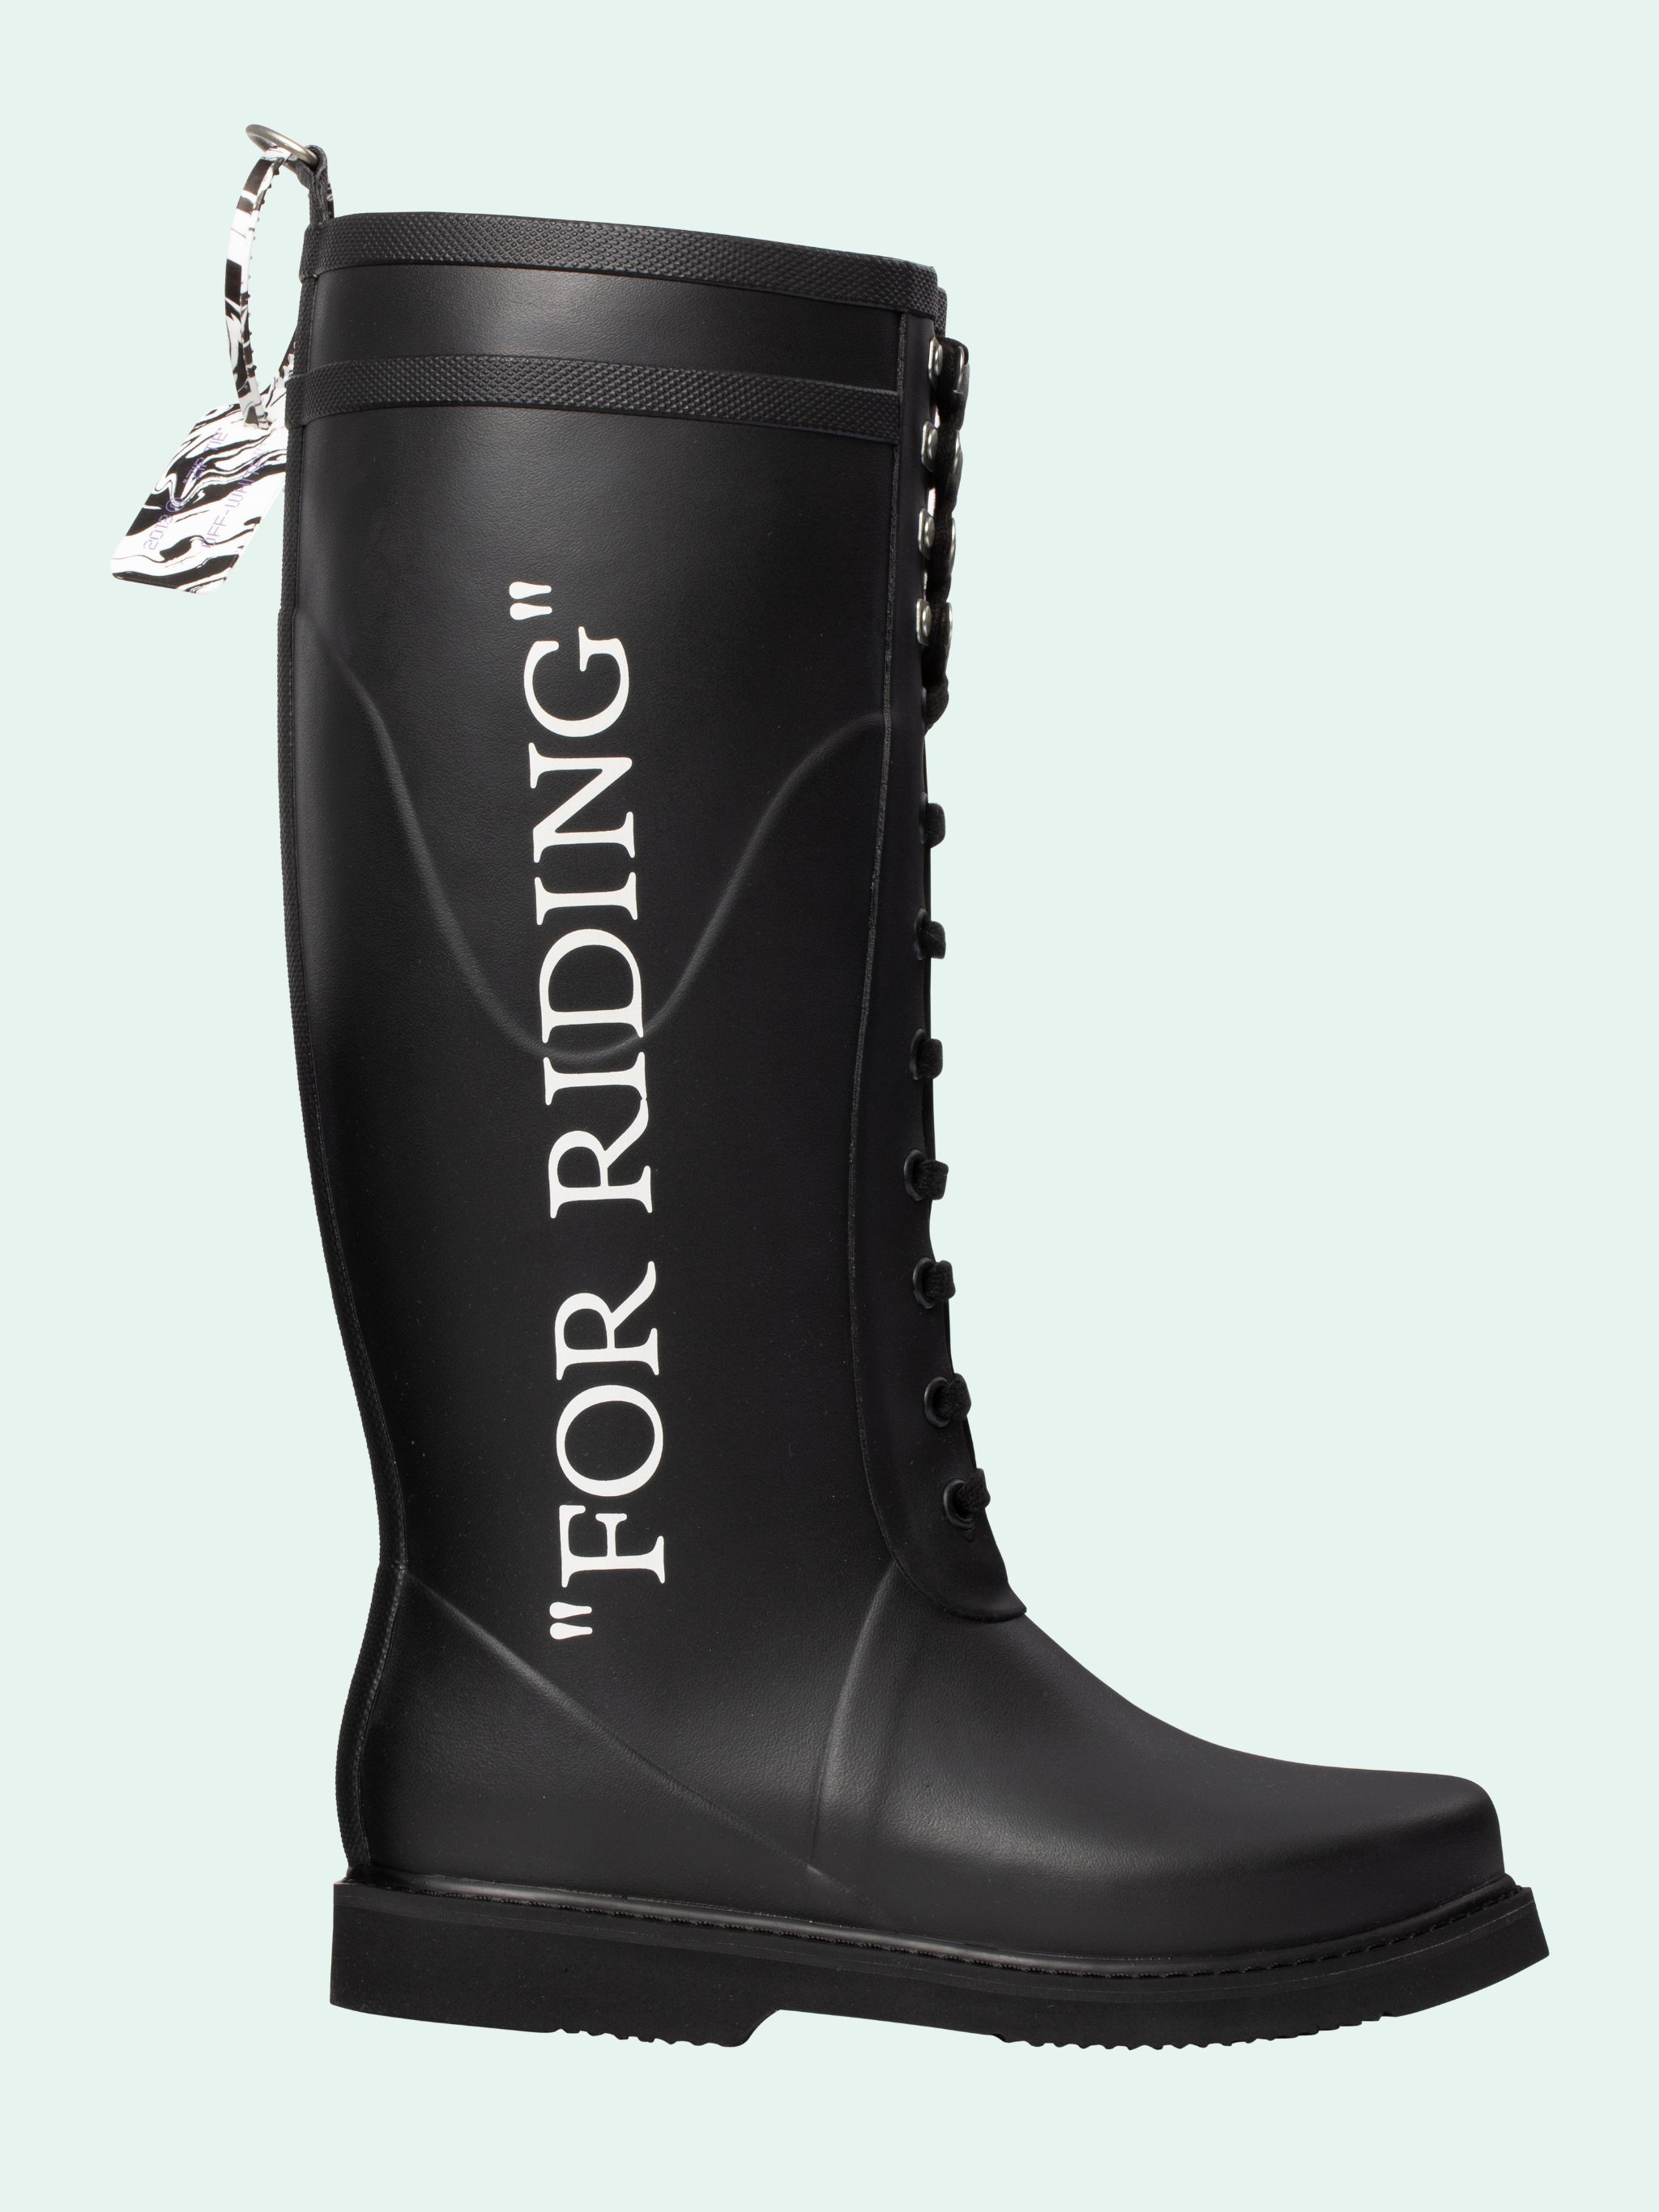 for riding boots